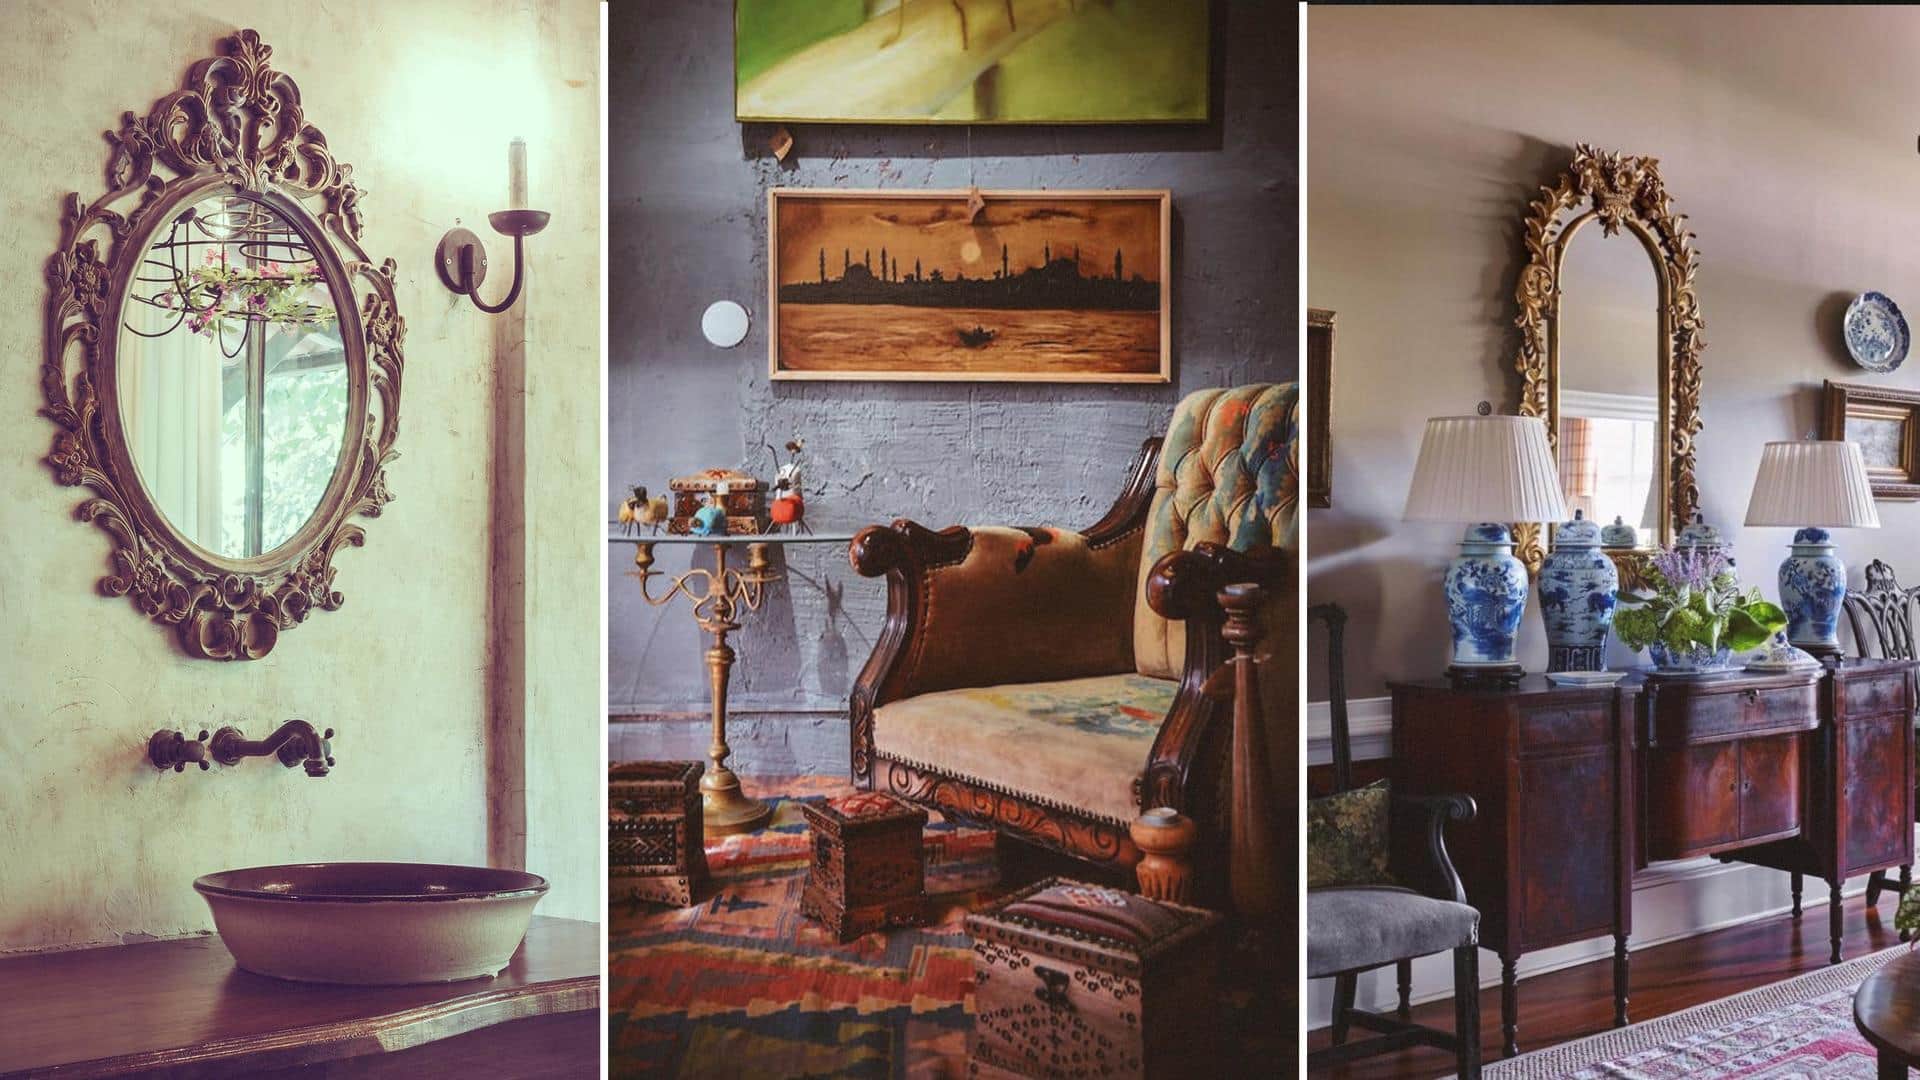 #HomeDecor: Here's how you can mix modern and vintage pieces